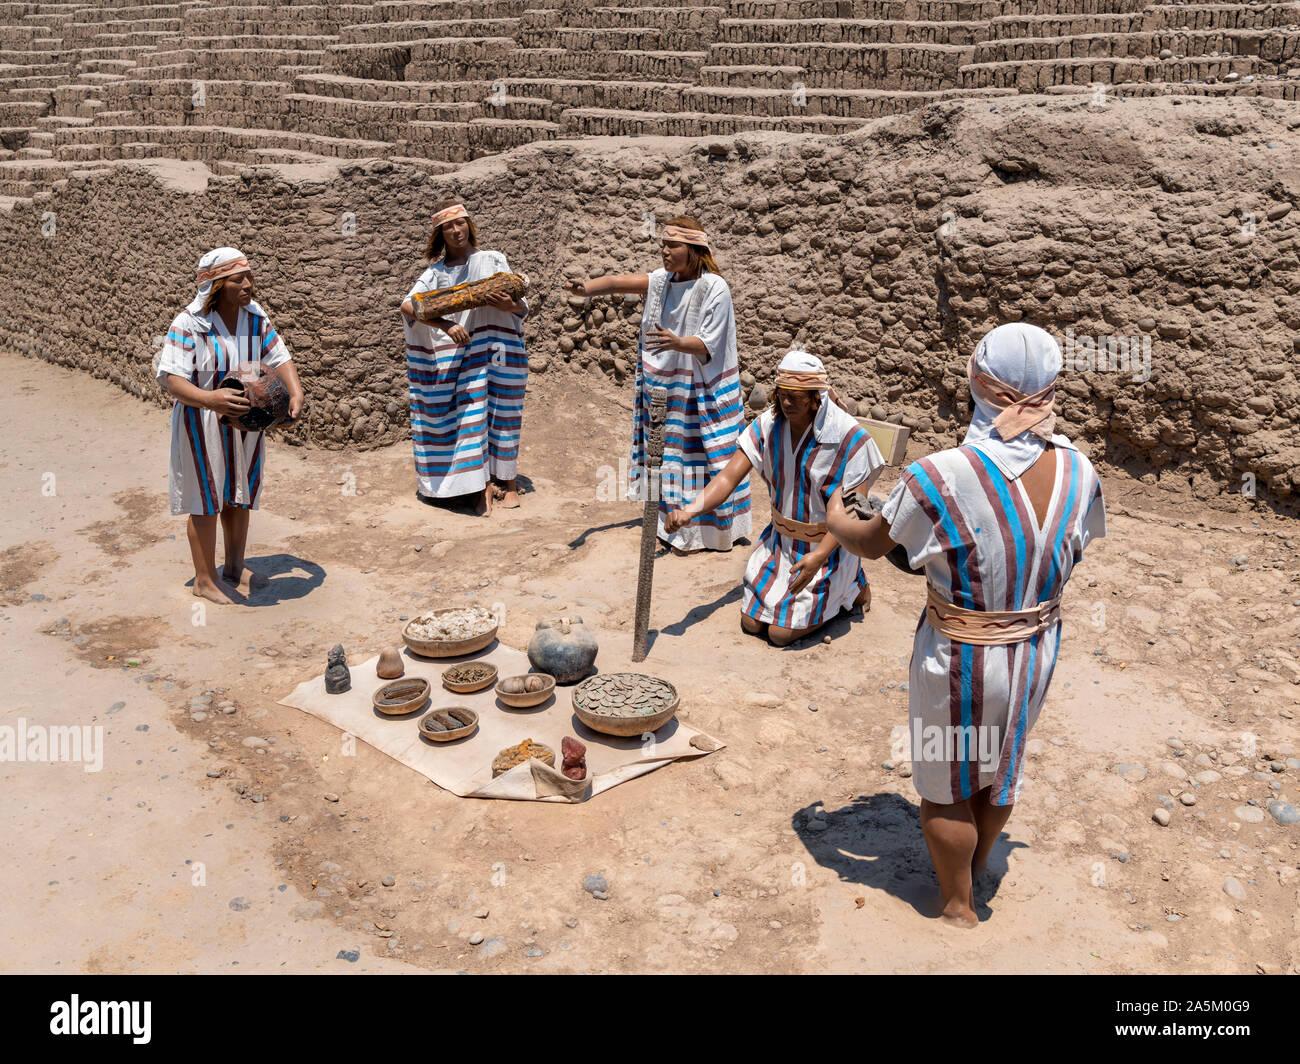 Tableau showing an Ychsma burial ritual in the ruins of Huaca Pucllana, an adobe pyramid dating from around 400 AD, Miraflores, Lima, Peru, South Amer Stock Photo